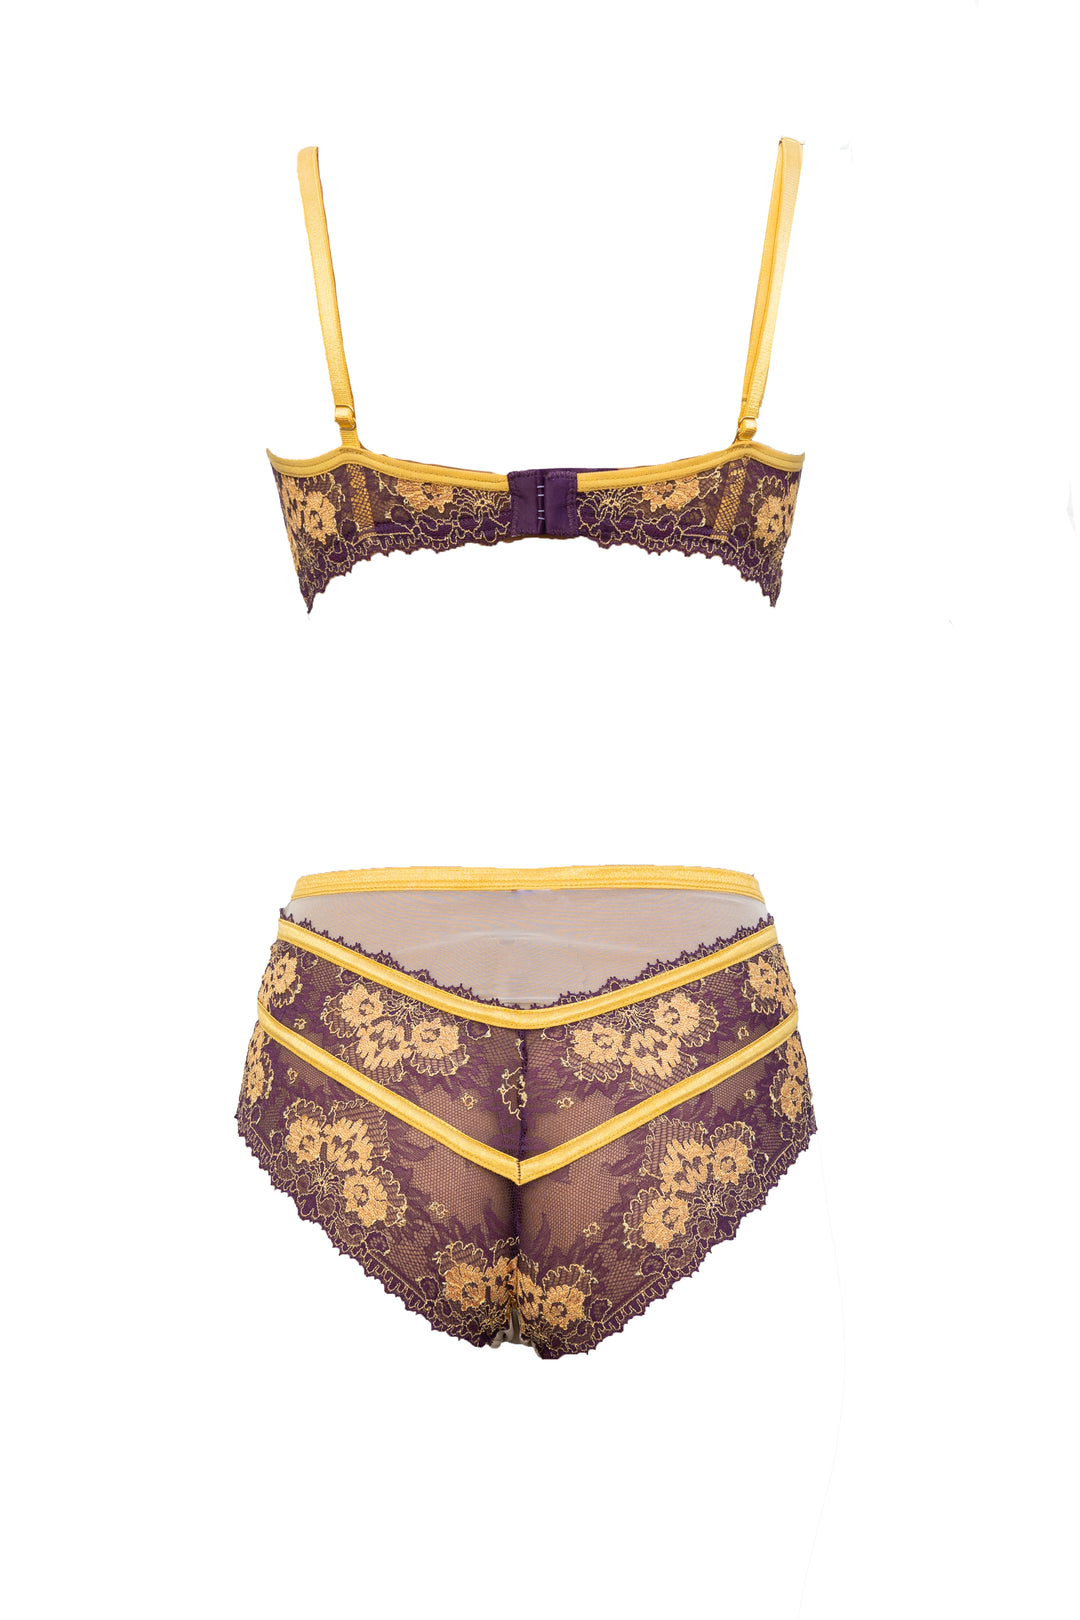 Babylon Exquisite Highwaisted Lace and Tulle Panty